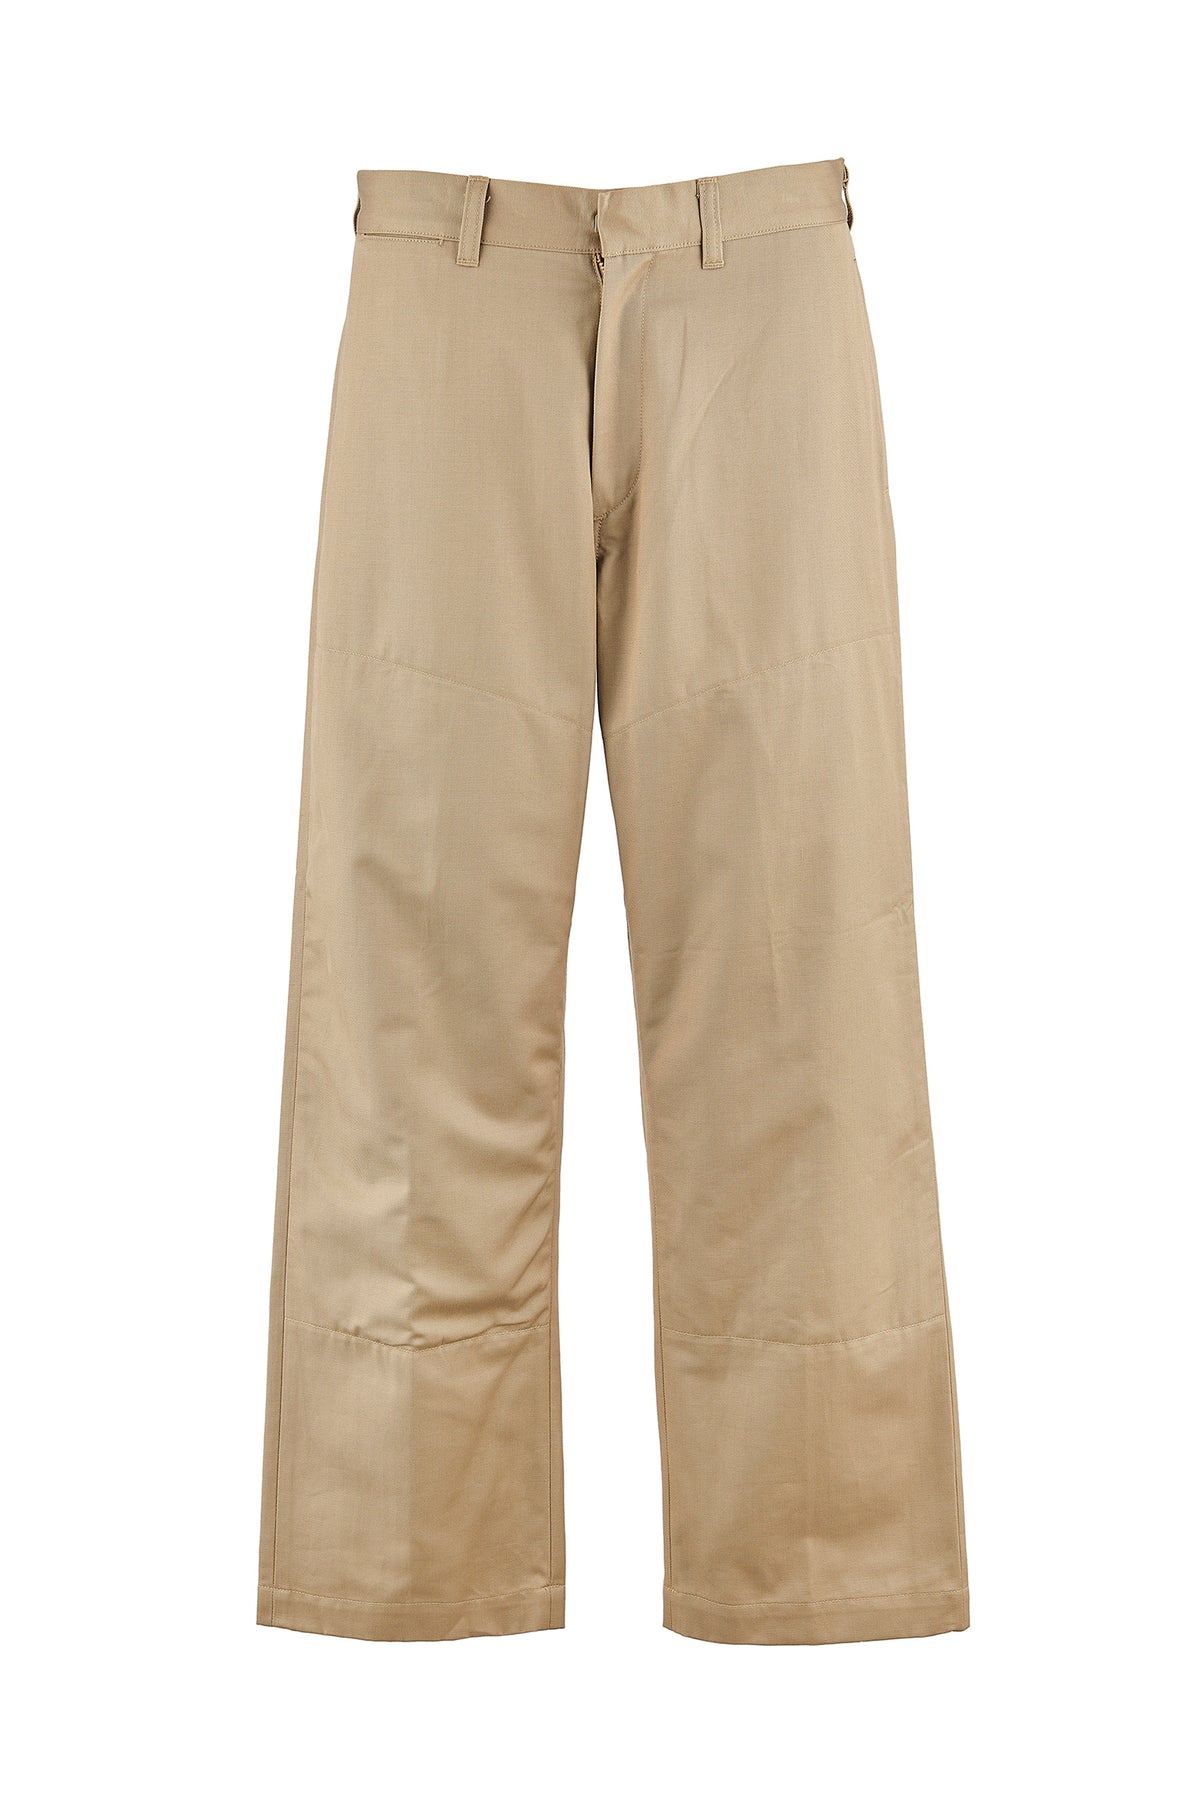 WIDE PANTS/CHINO / BEI